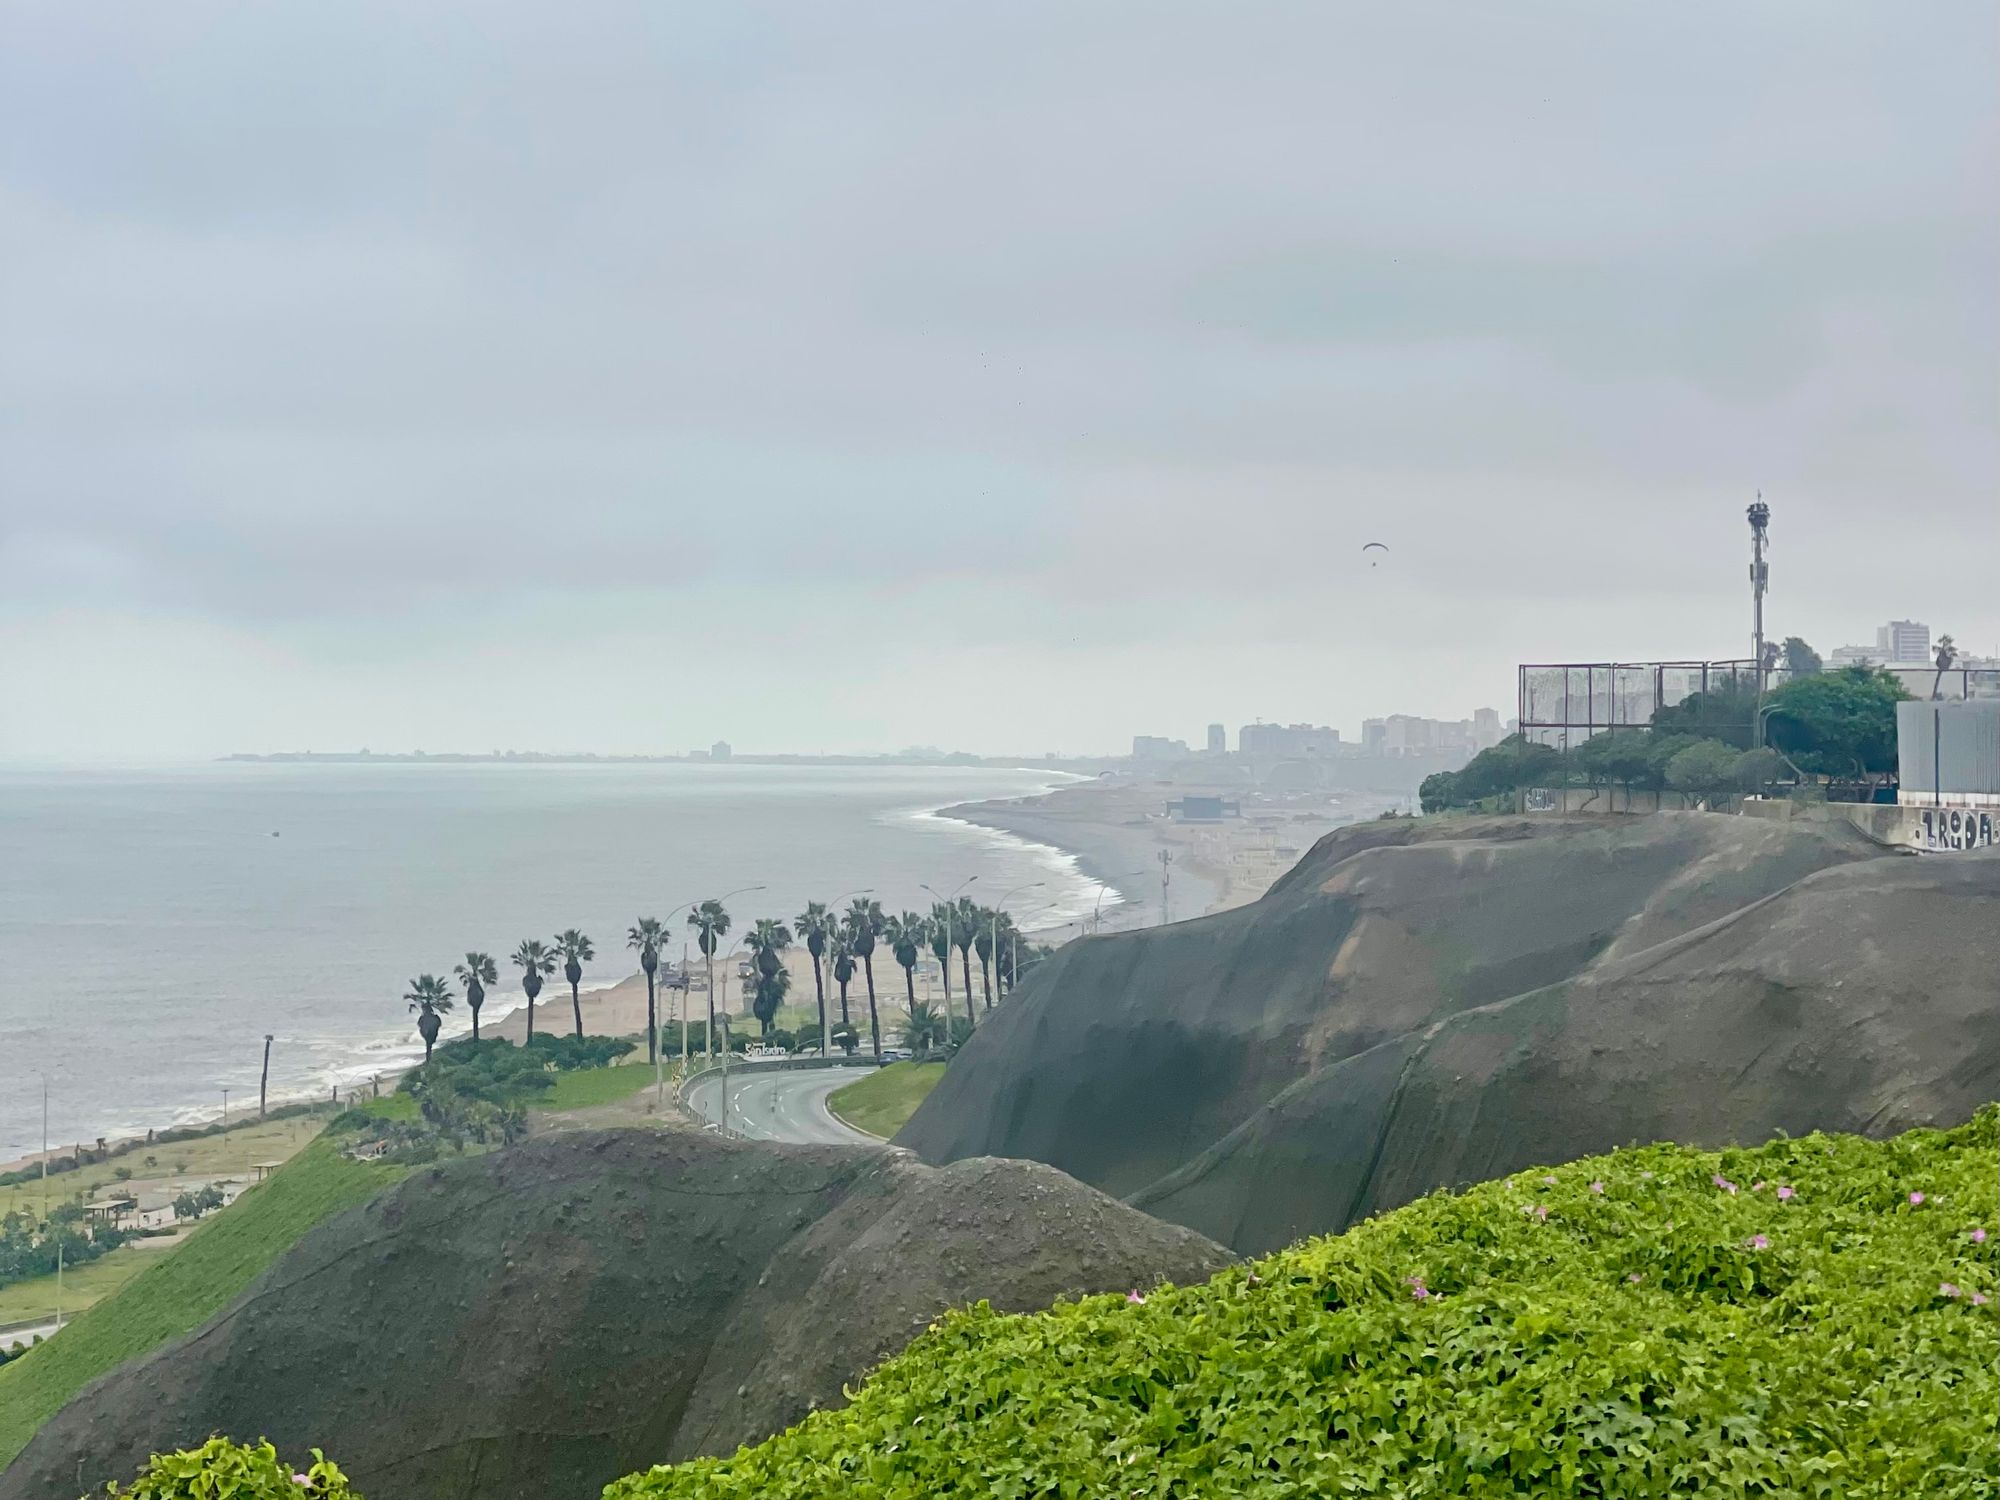 A month in Lima: Traffic, potatoes and the donkey’s belly